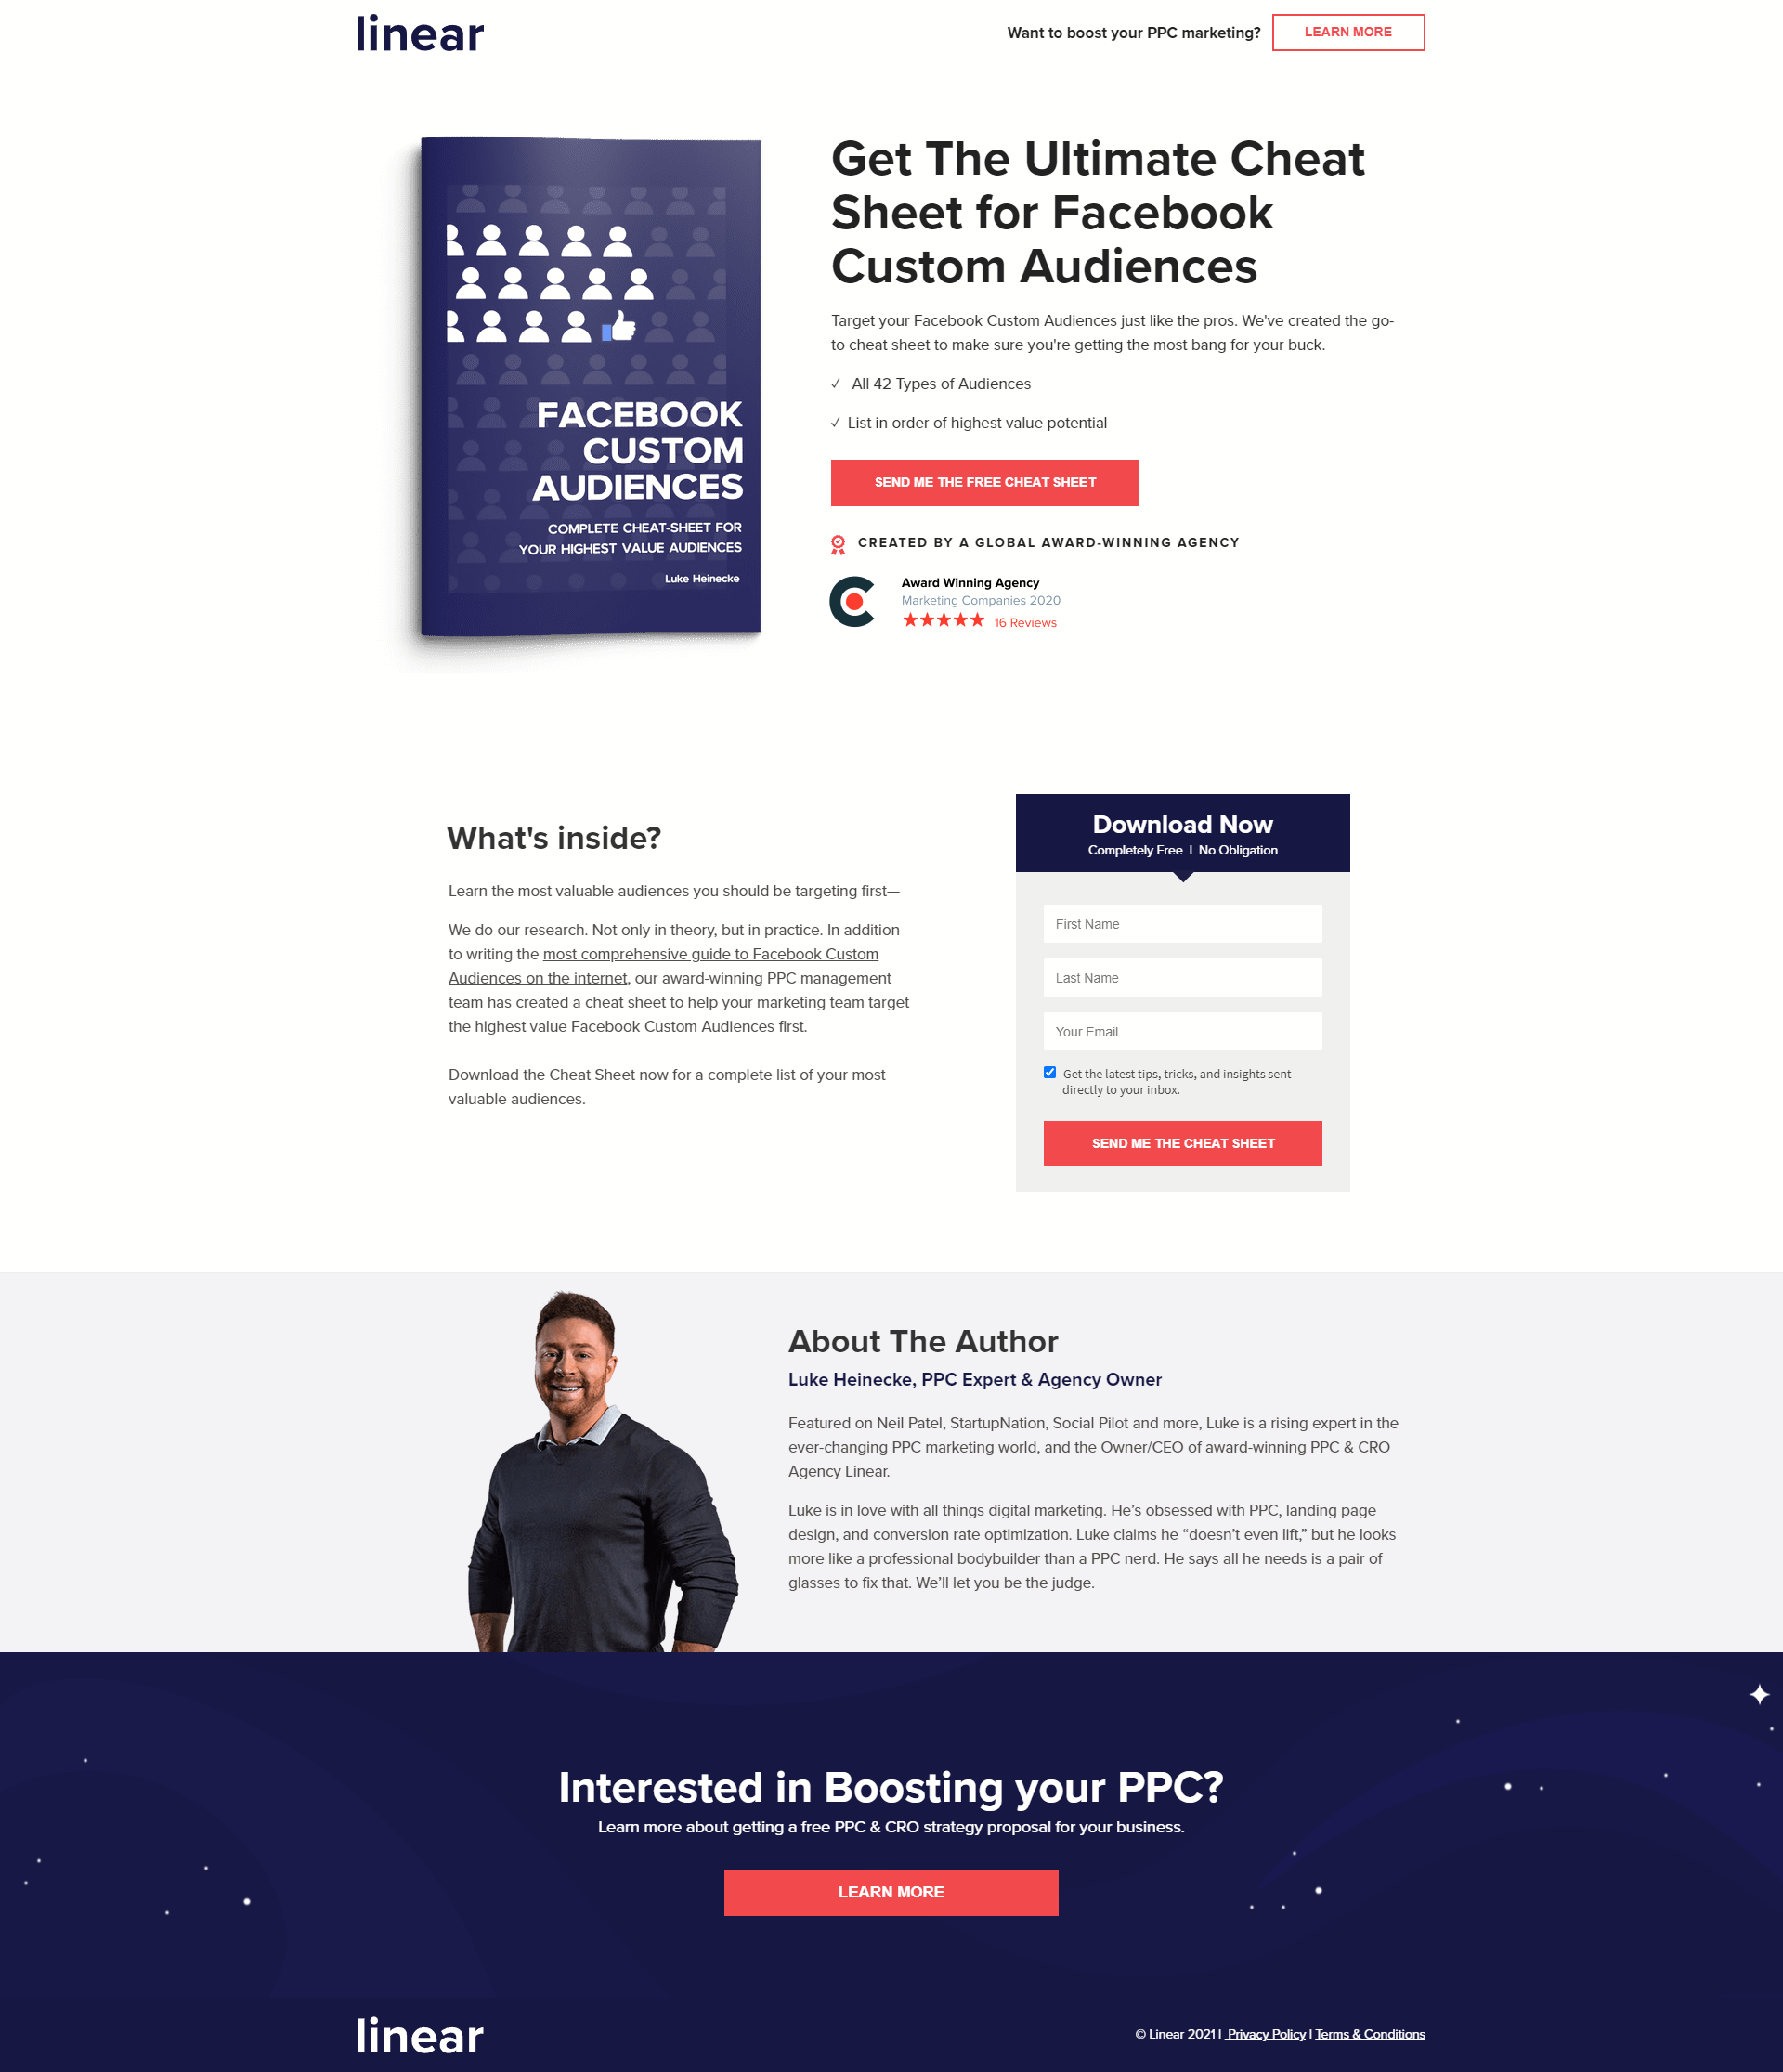 landing-page-streamlined-lineardesign-get-facebook-audiences-cheat-sheet